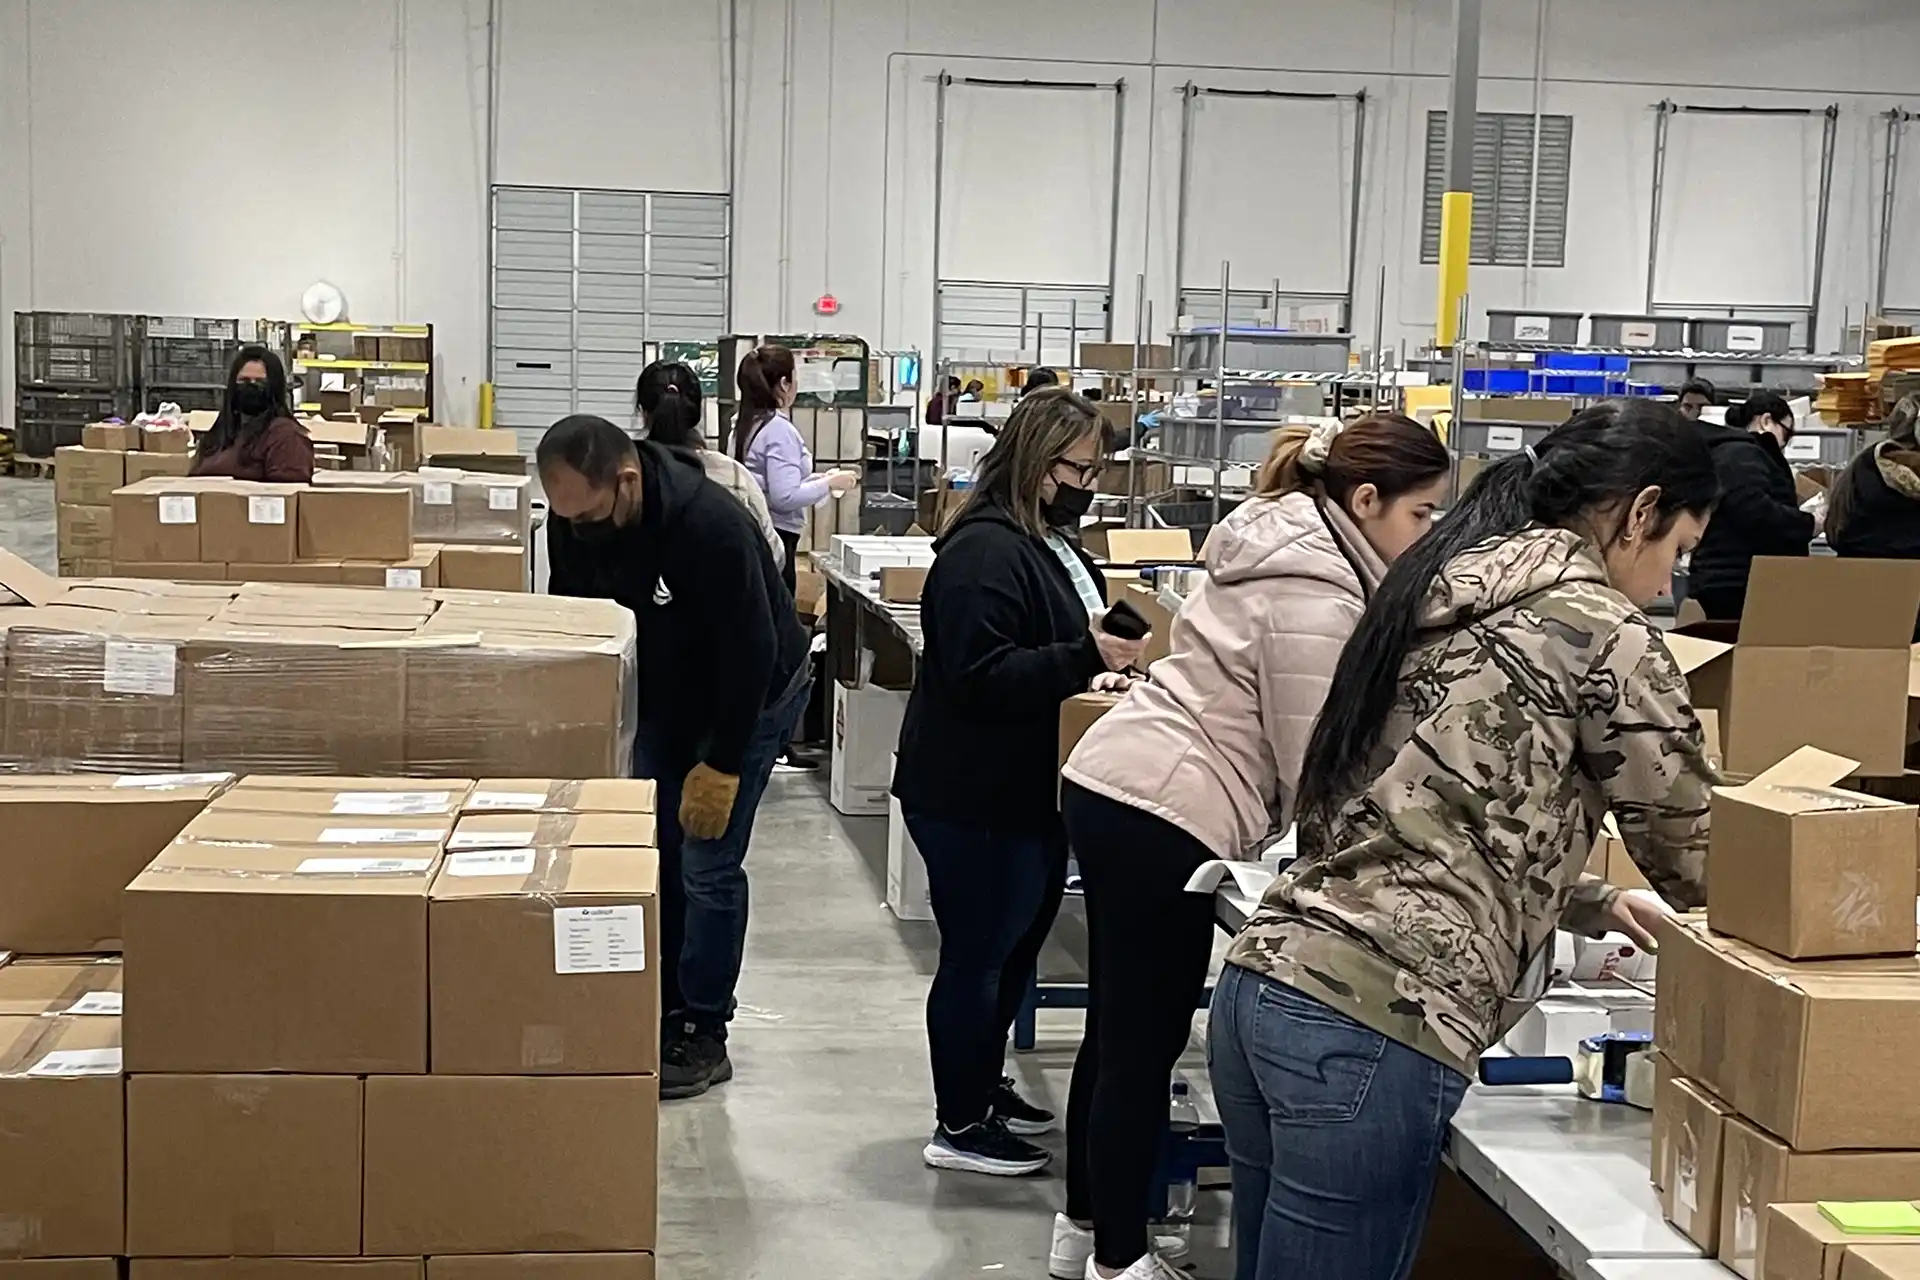 ecommerce fulfillment warehouse workers